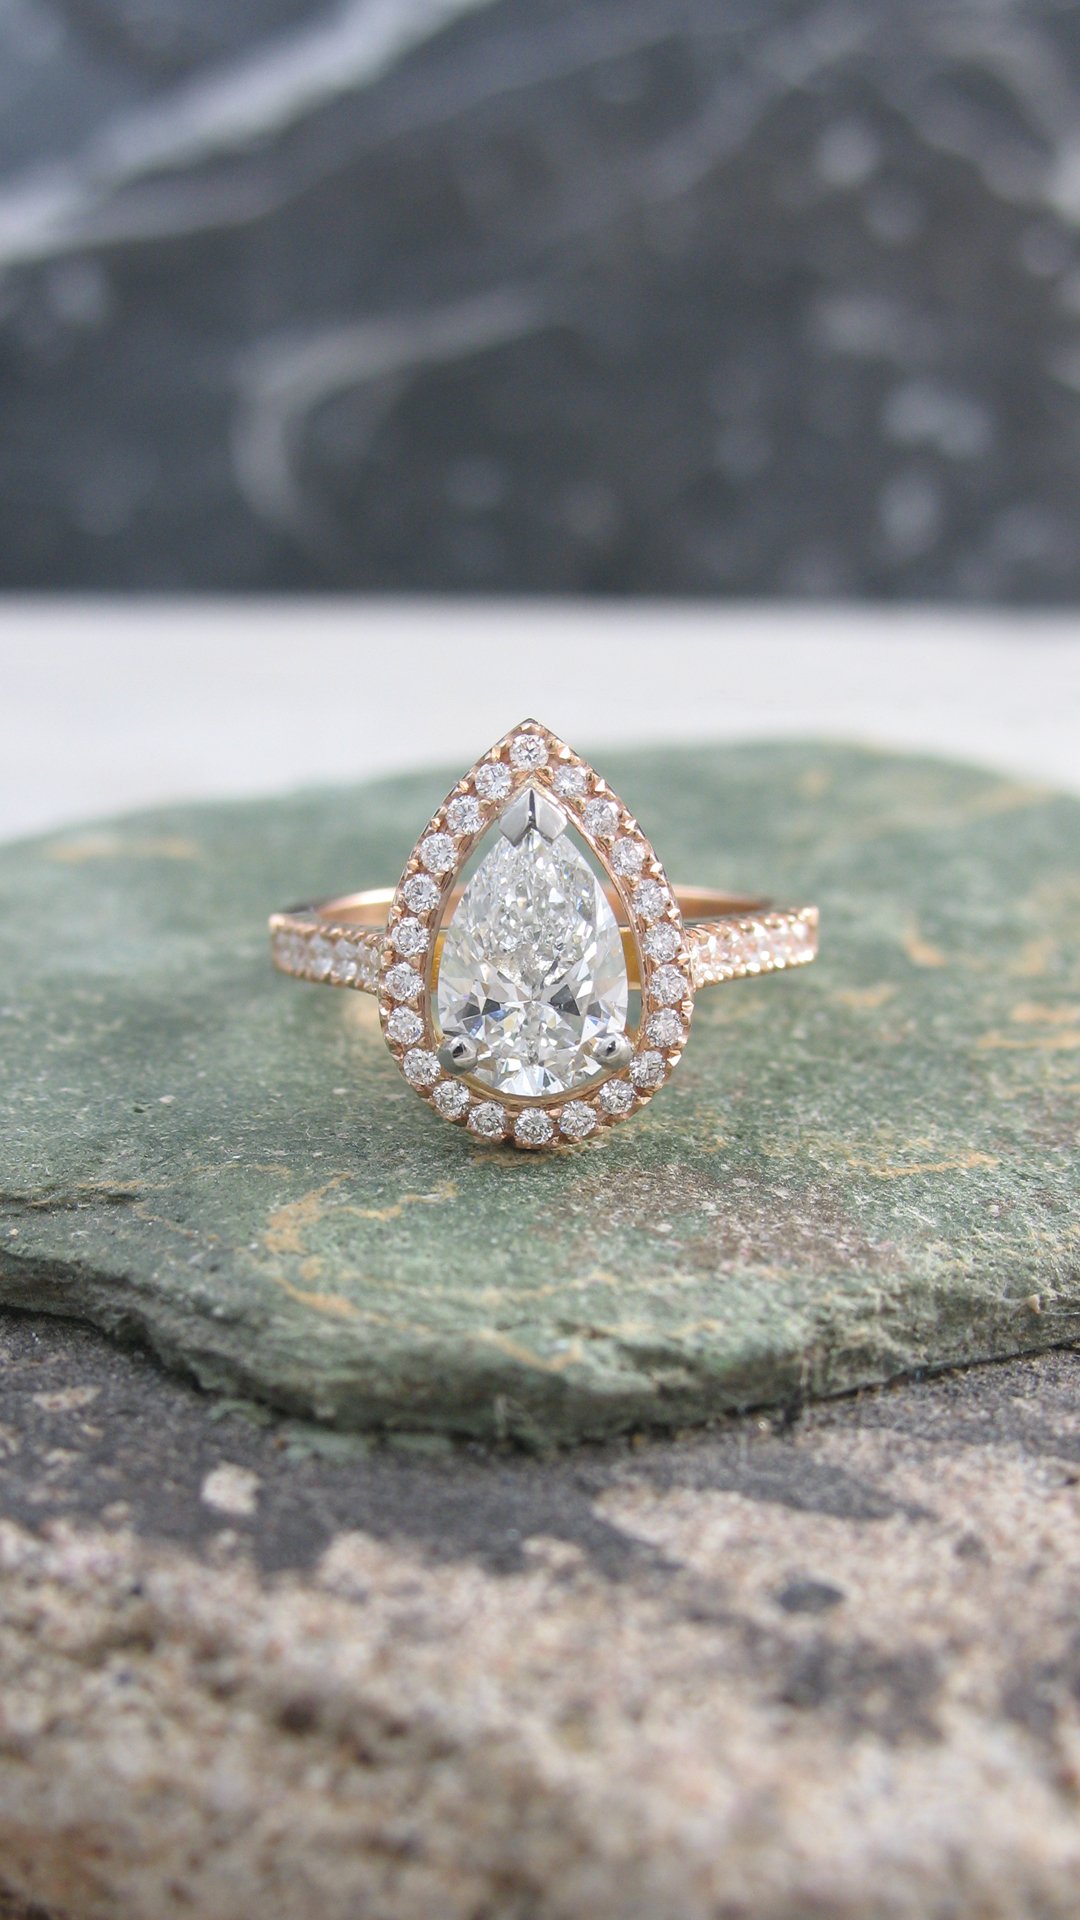 A rose gold pear shaped halo diamond engagement ring